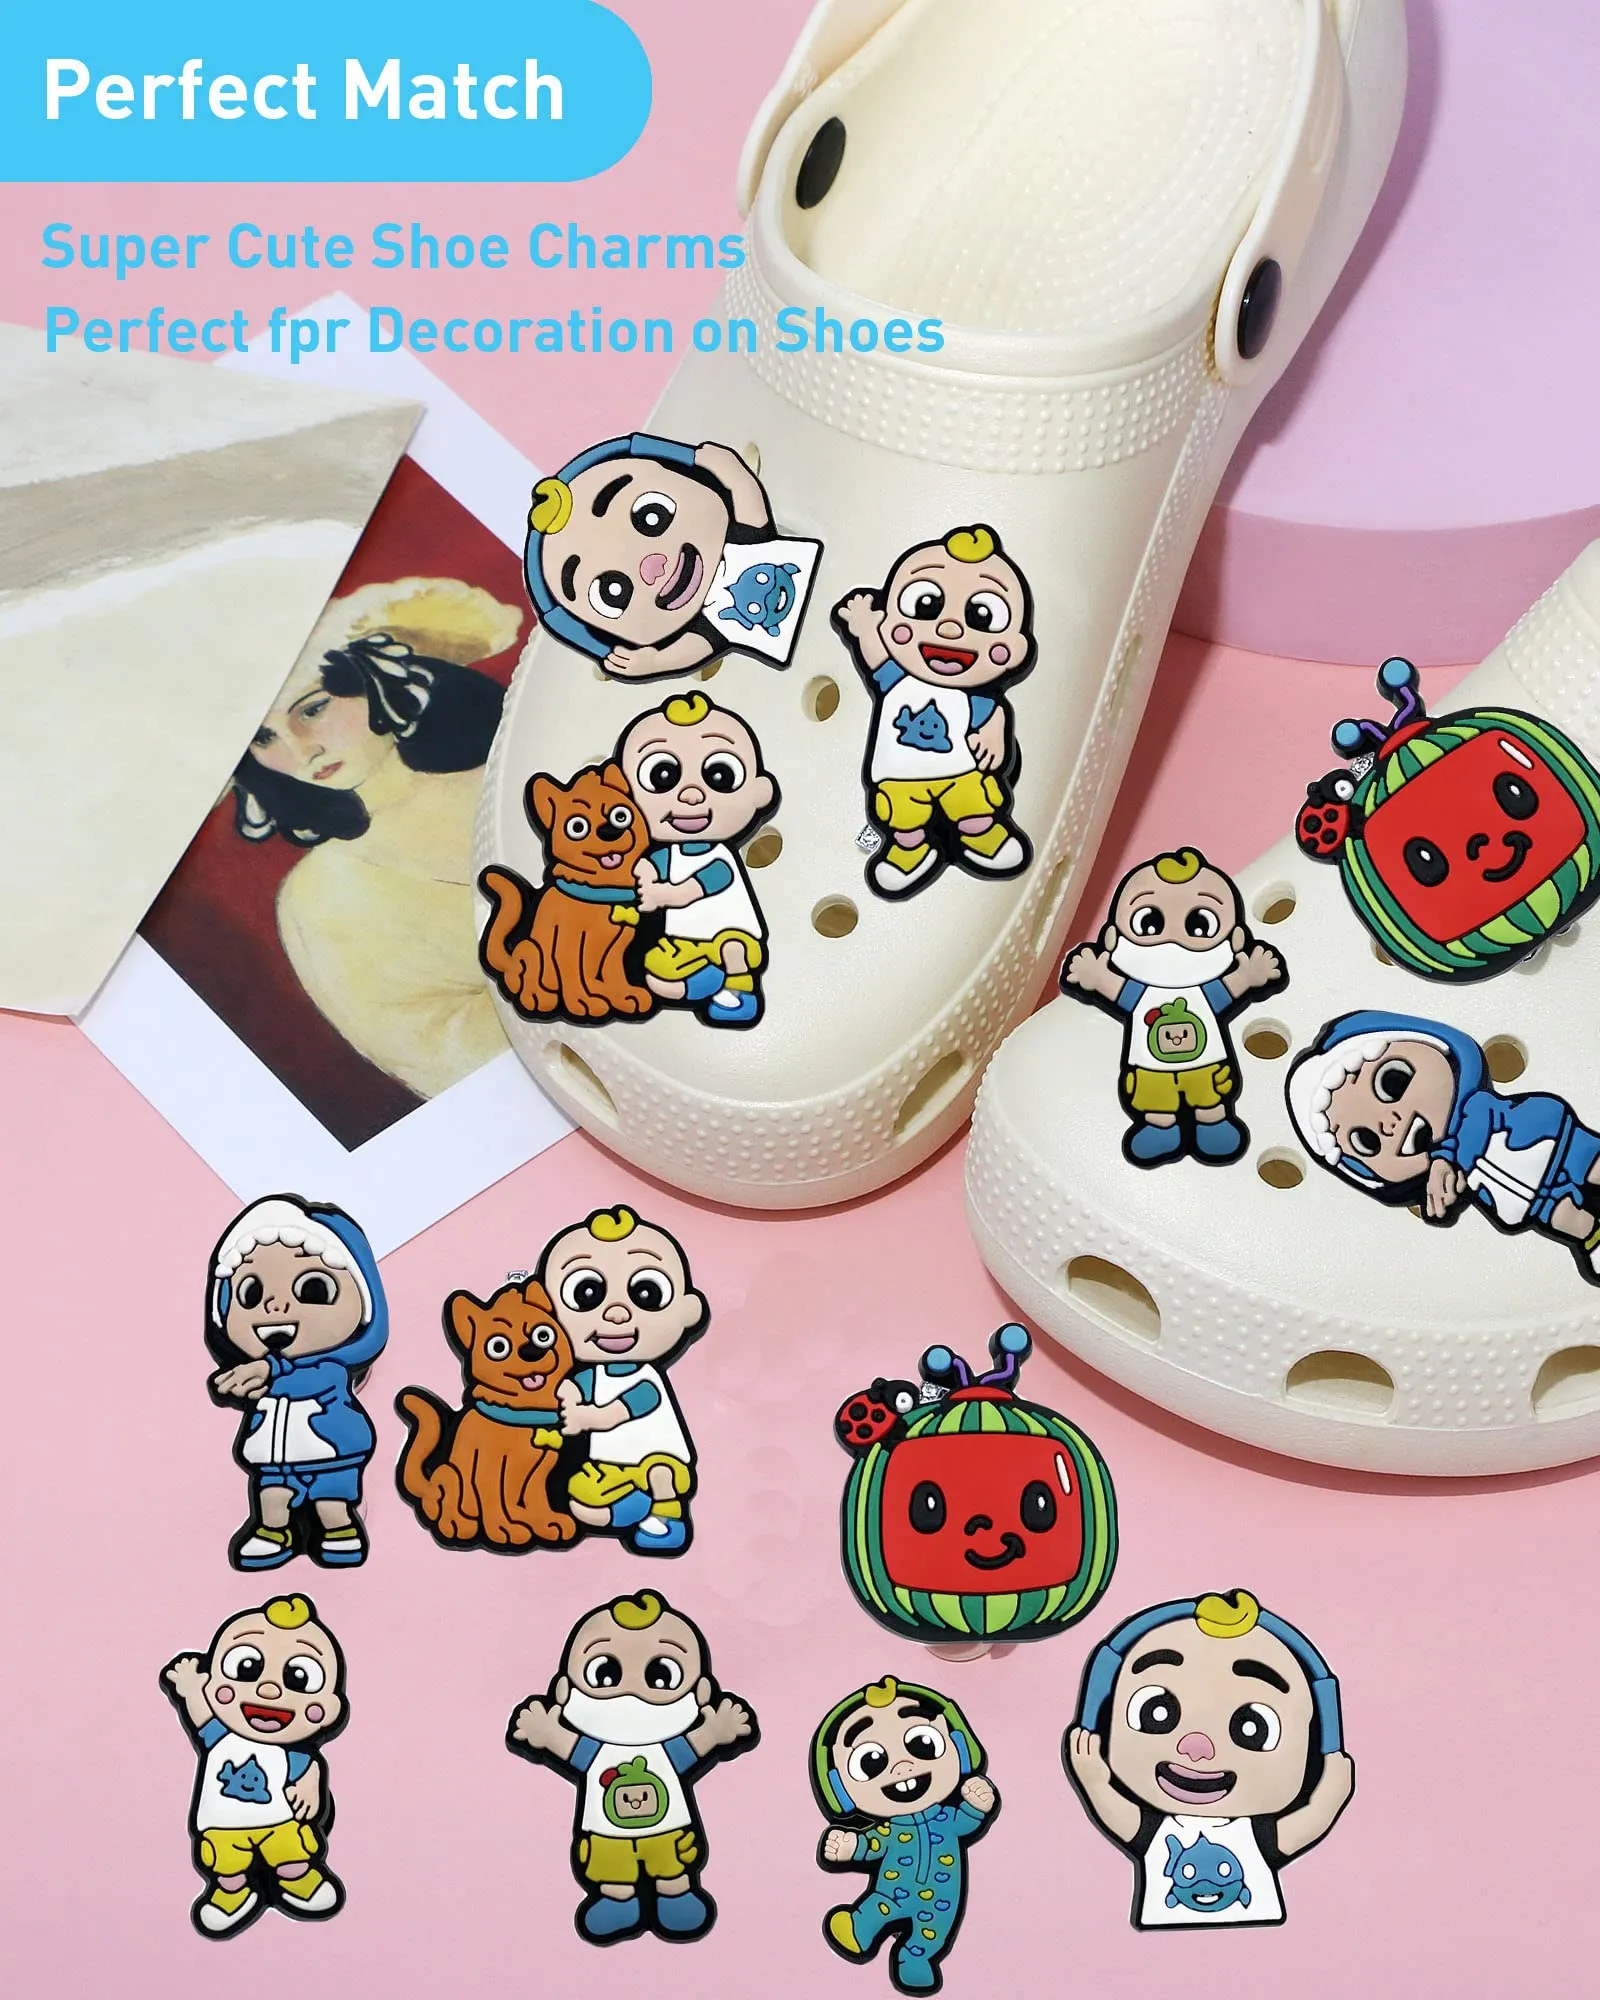 shoe charms for kids shoe decoration charms for clog sandals bracelets pvc shoe charms for boys girls party favor gifts